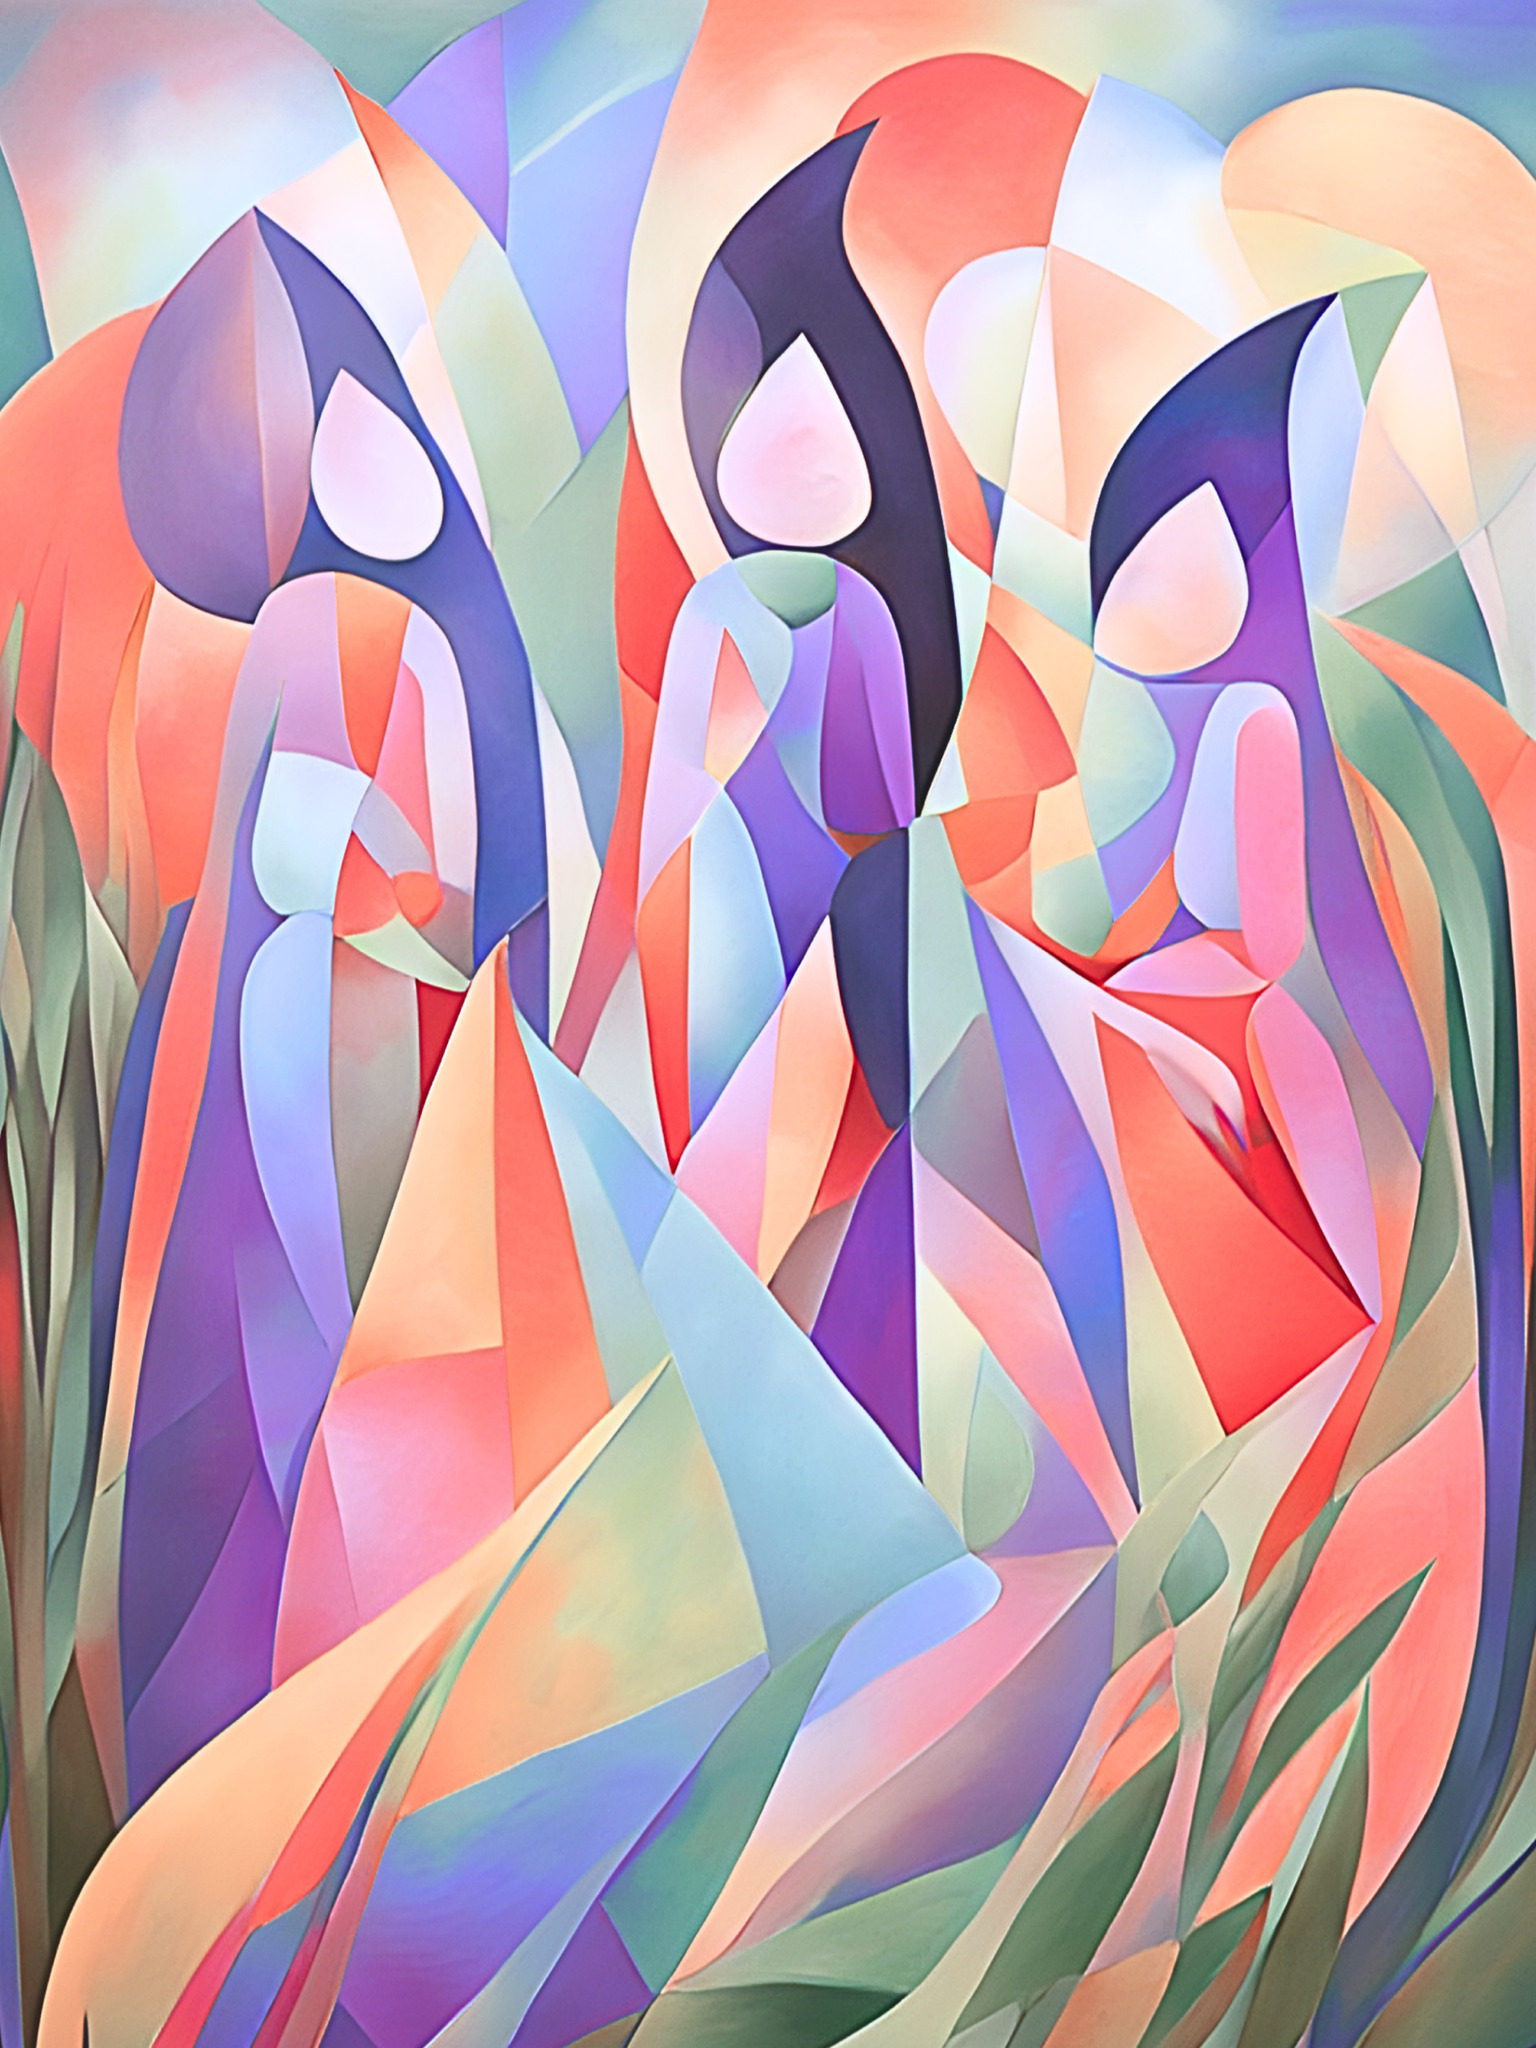 Graphic Art "Woman in the sea of colors"